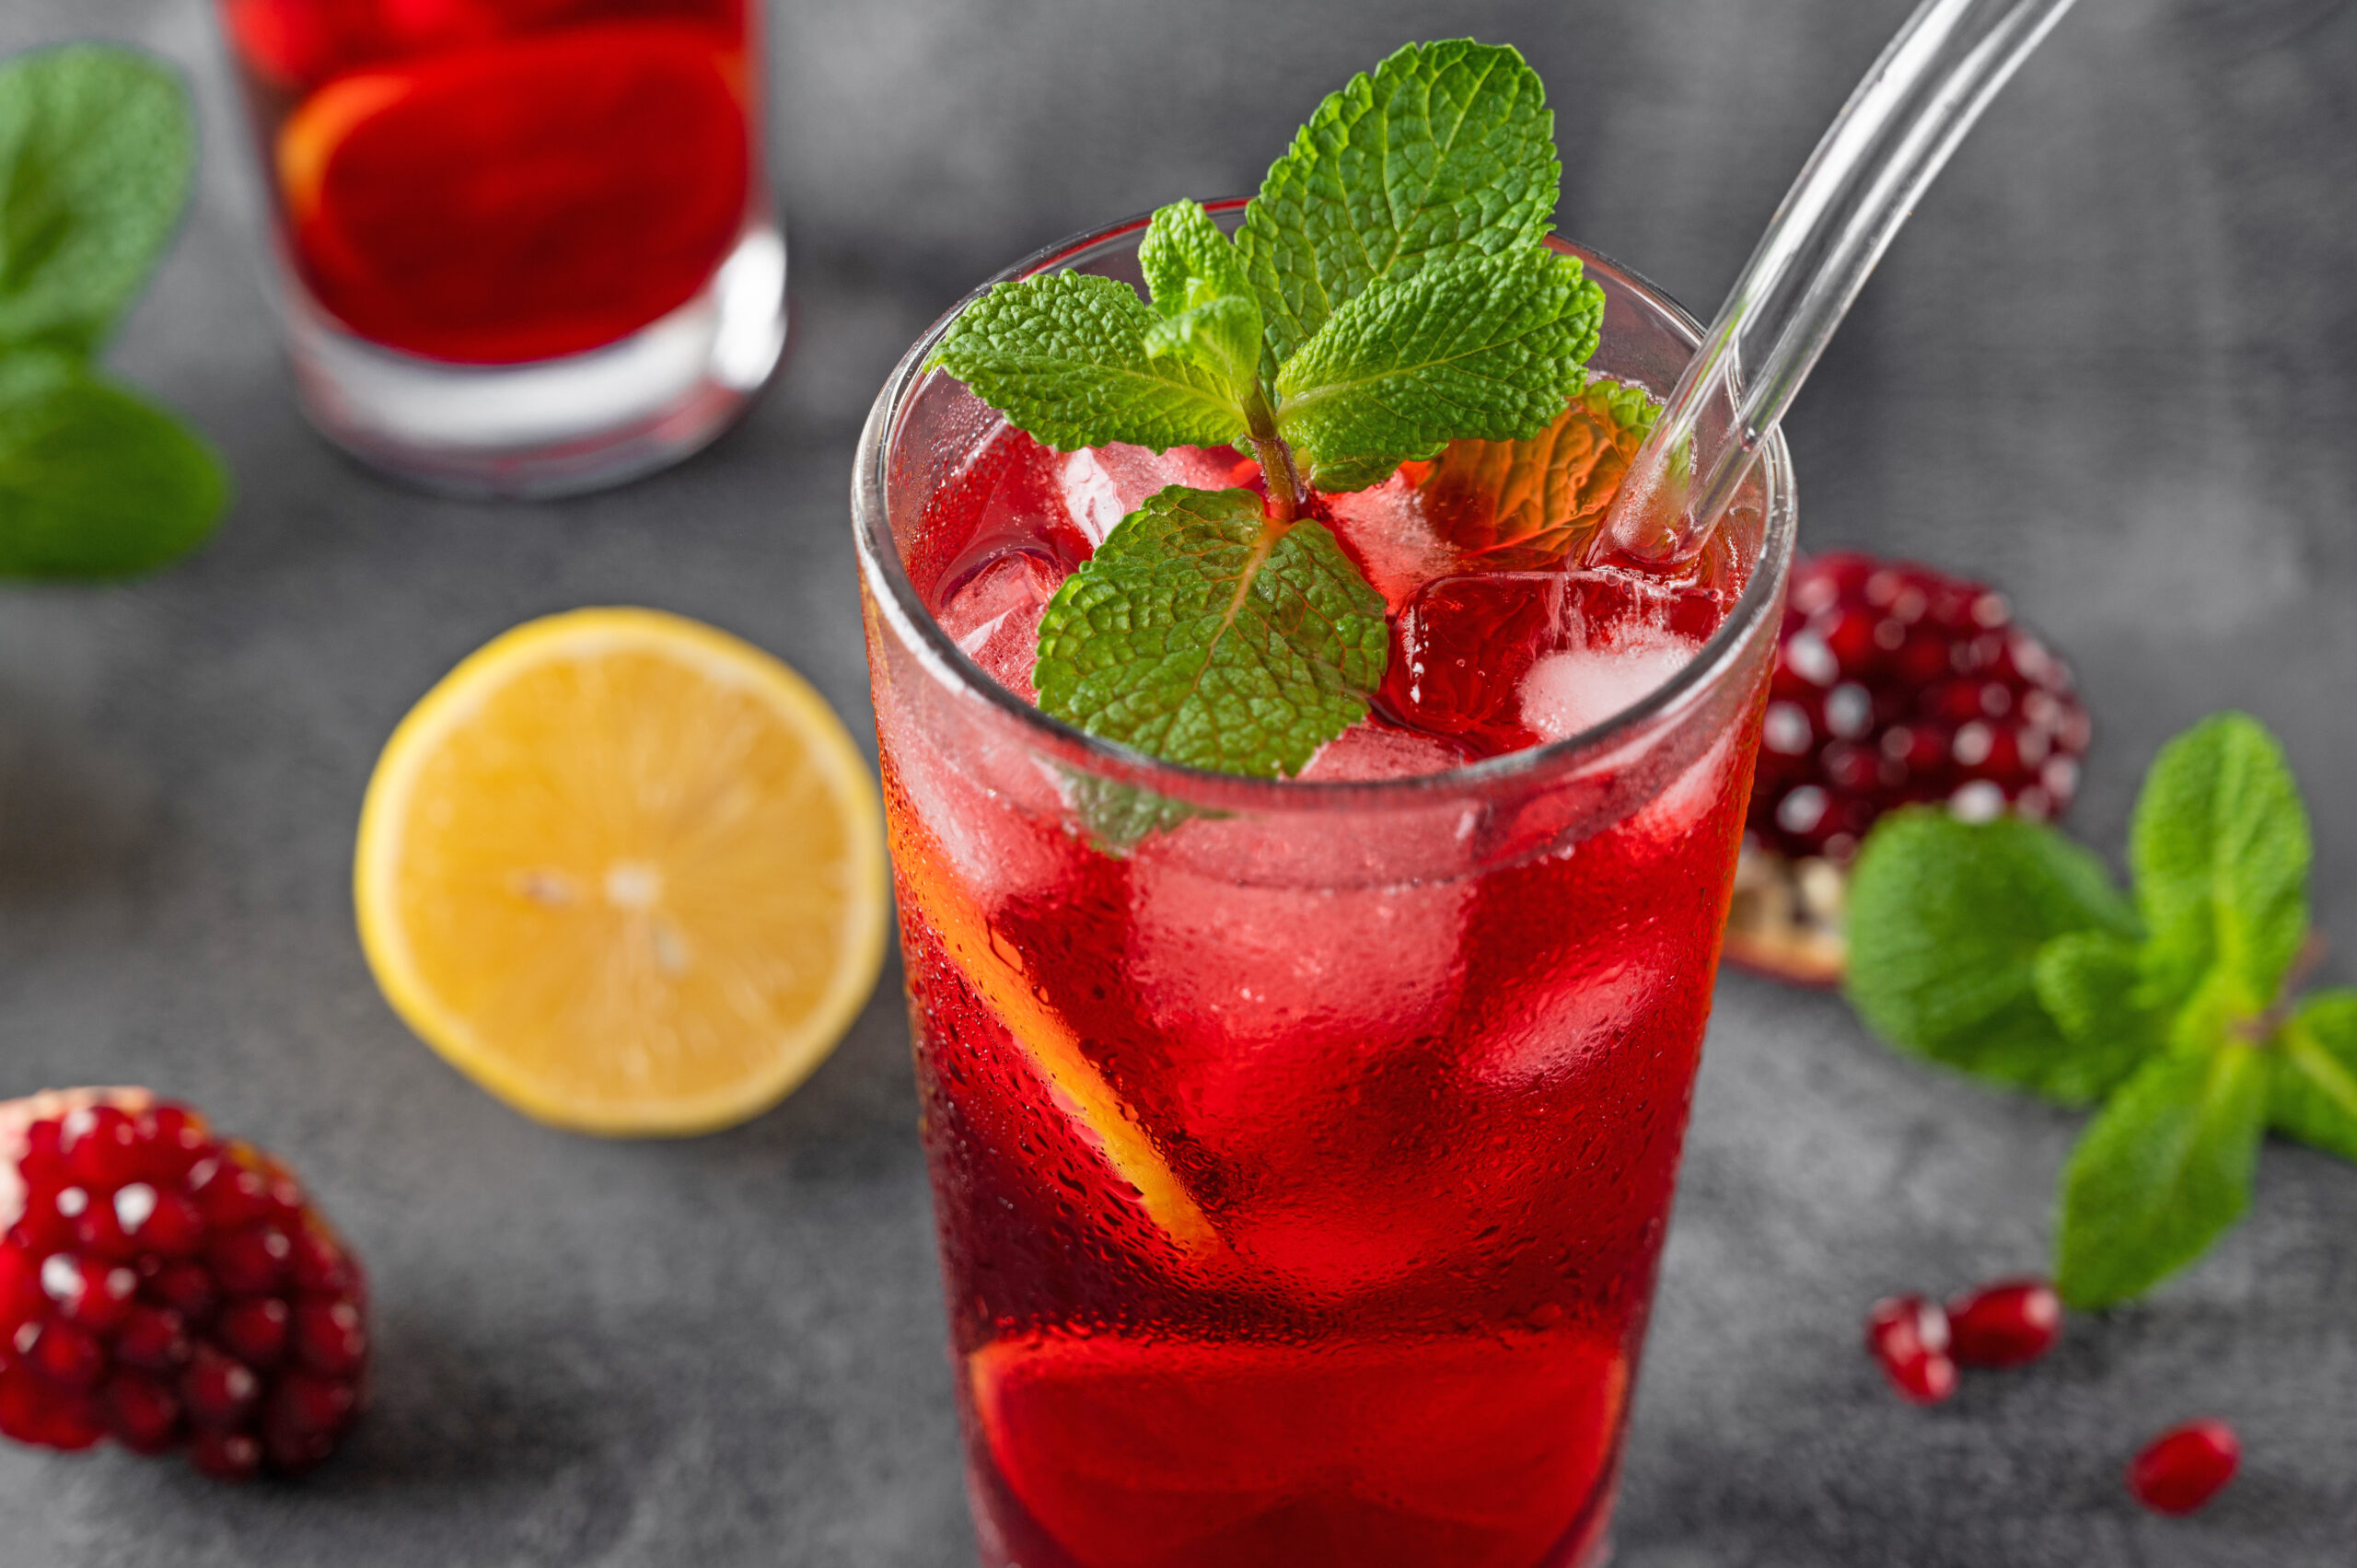 A refreshing red beverage served in a tall glass with ice, lemon slices, and garnished with fresh mint leaves. A straw is placed in the glass. In the background, there are lemons, mint leaves, and pomegranate seeds on a gray surface.